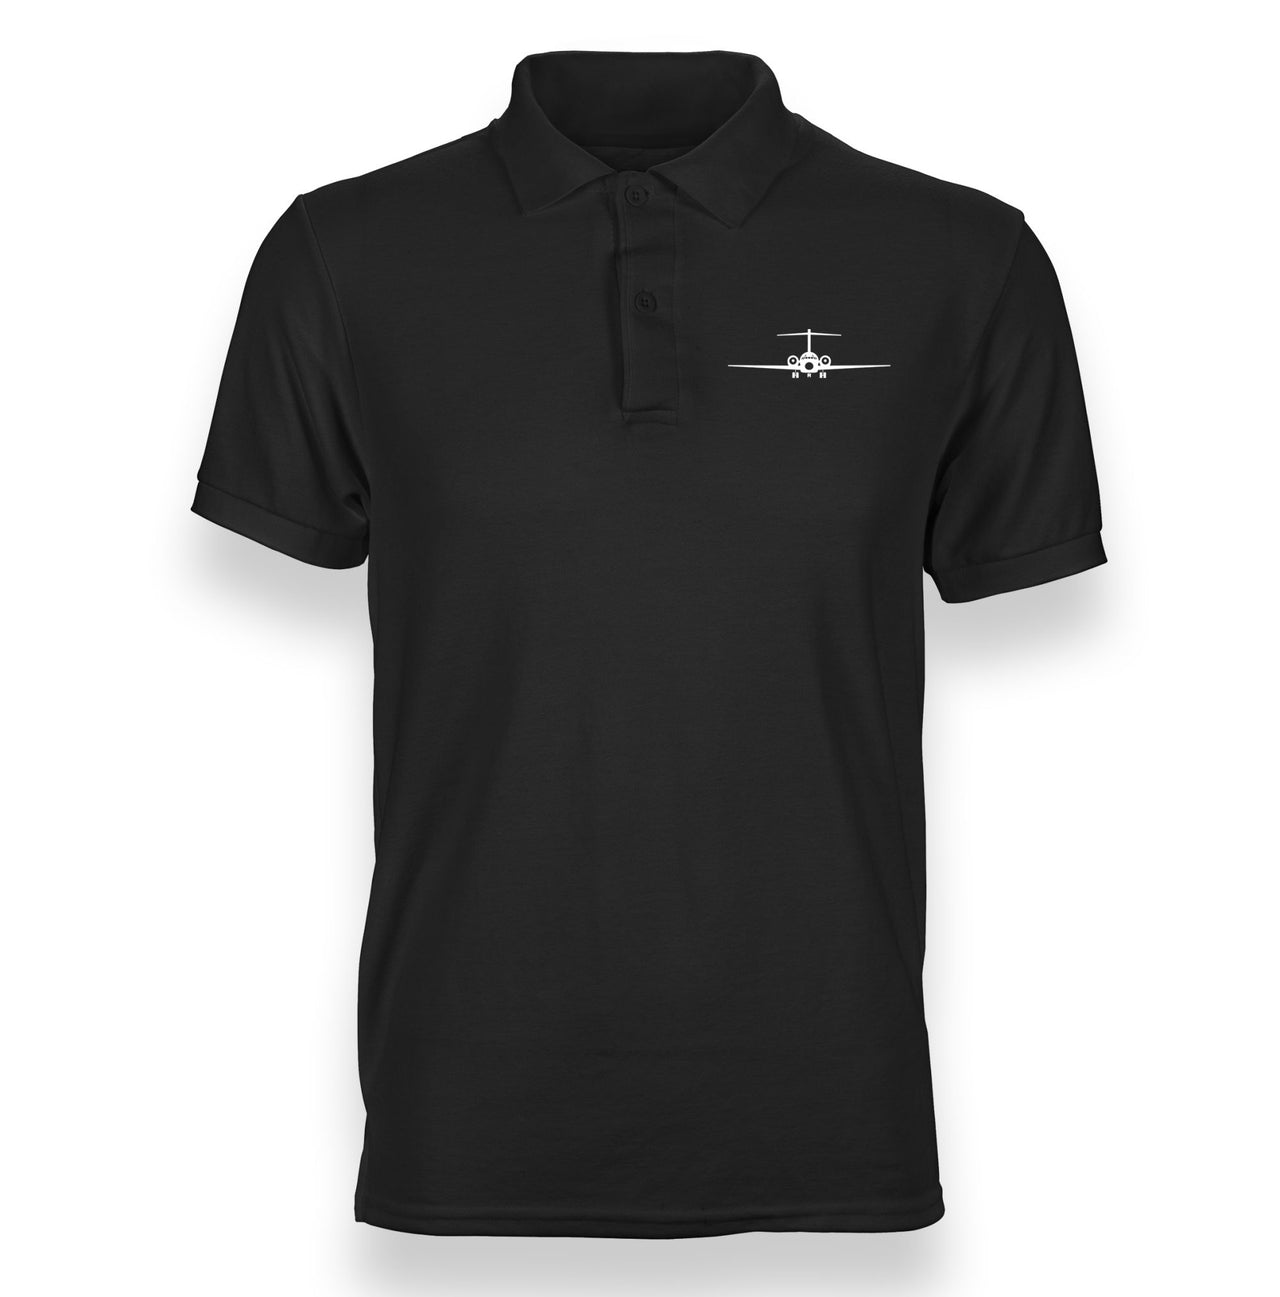 Boeing 717 Silhouette Designed "WOMEN" Polo T-Shirts